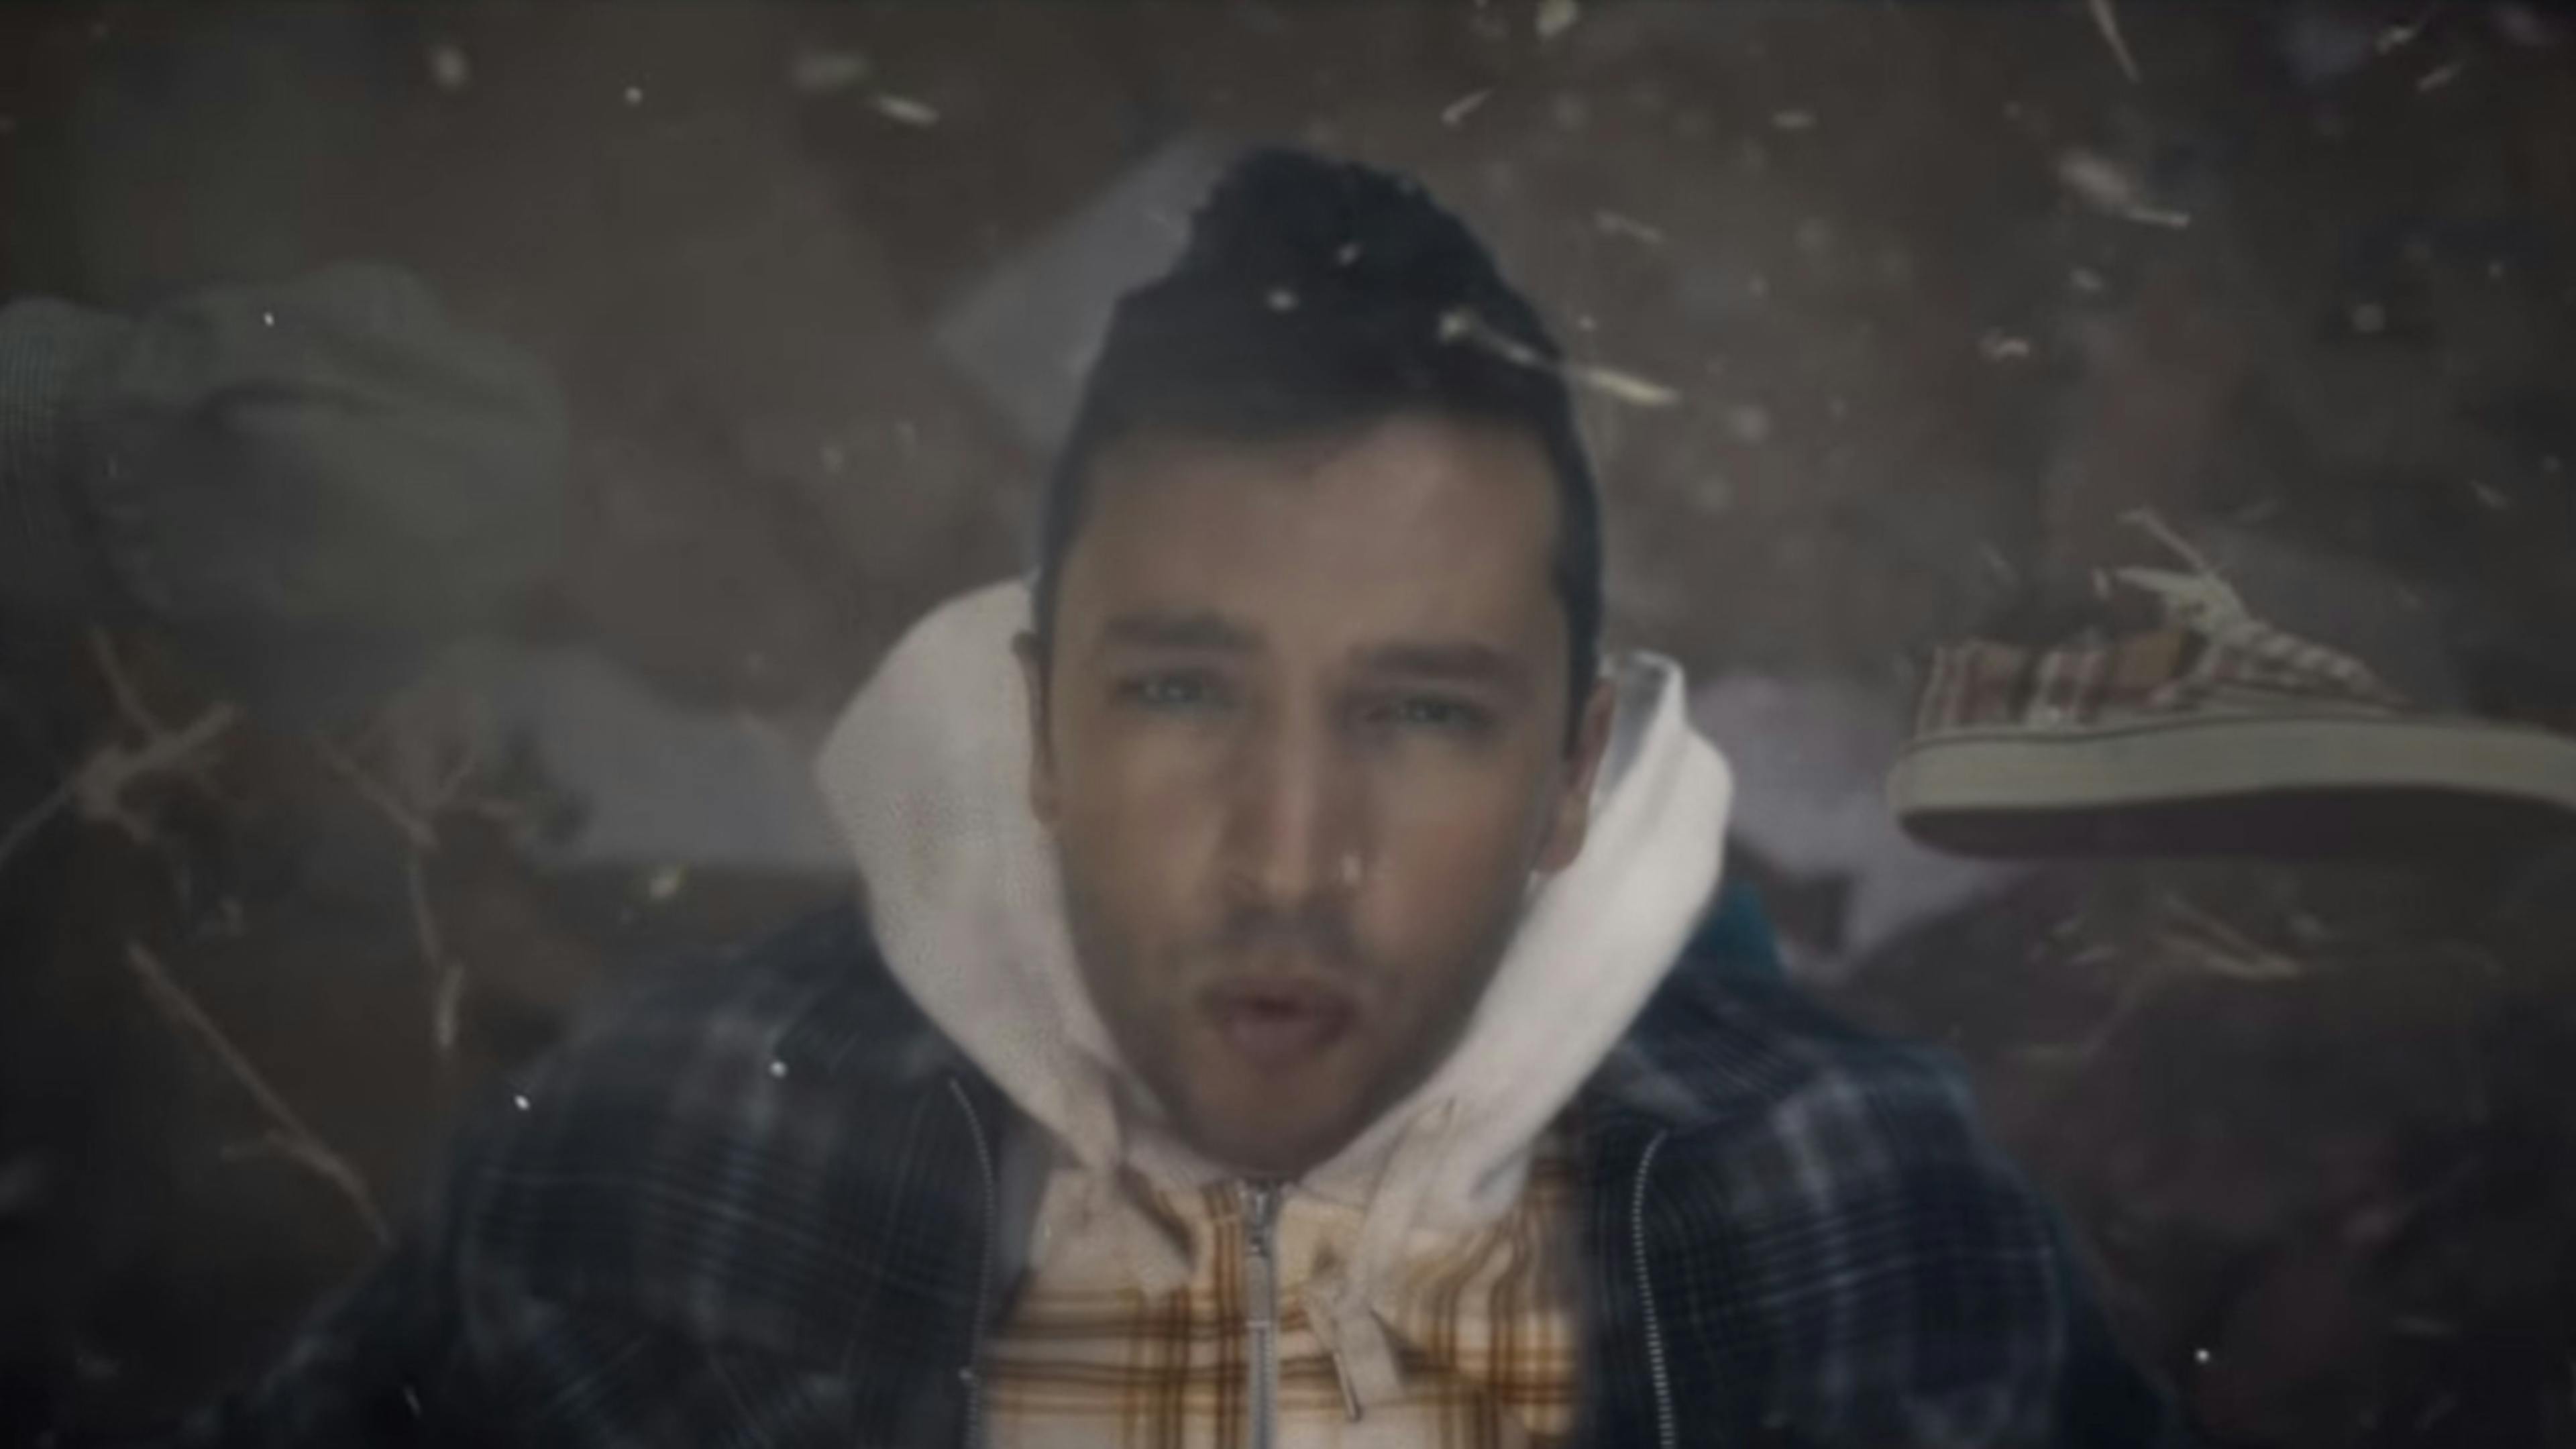 Watch twenty one pilots' New Video For The Hype